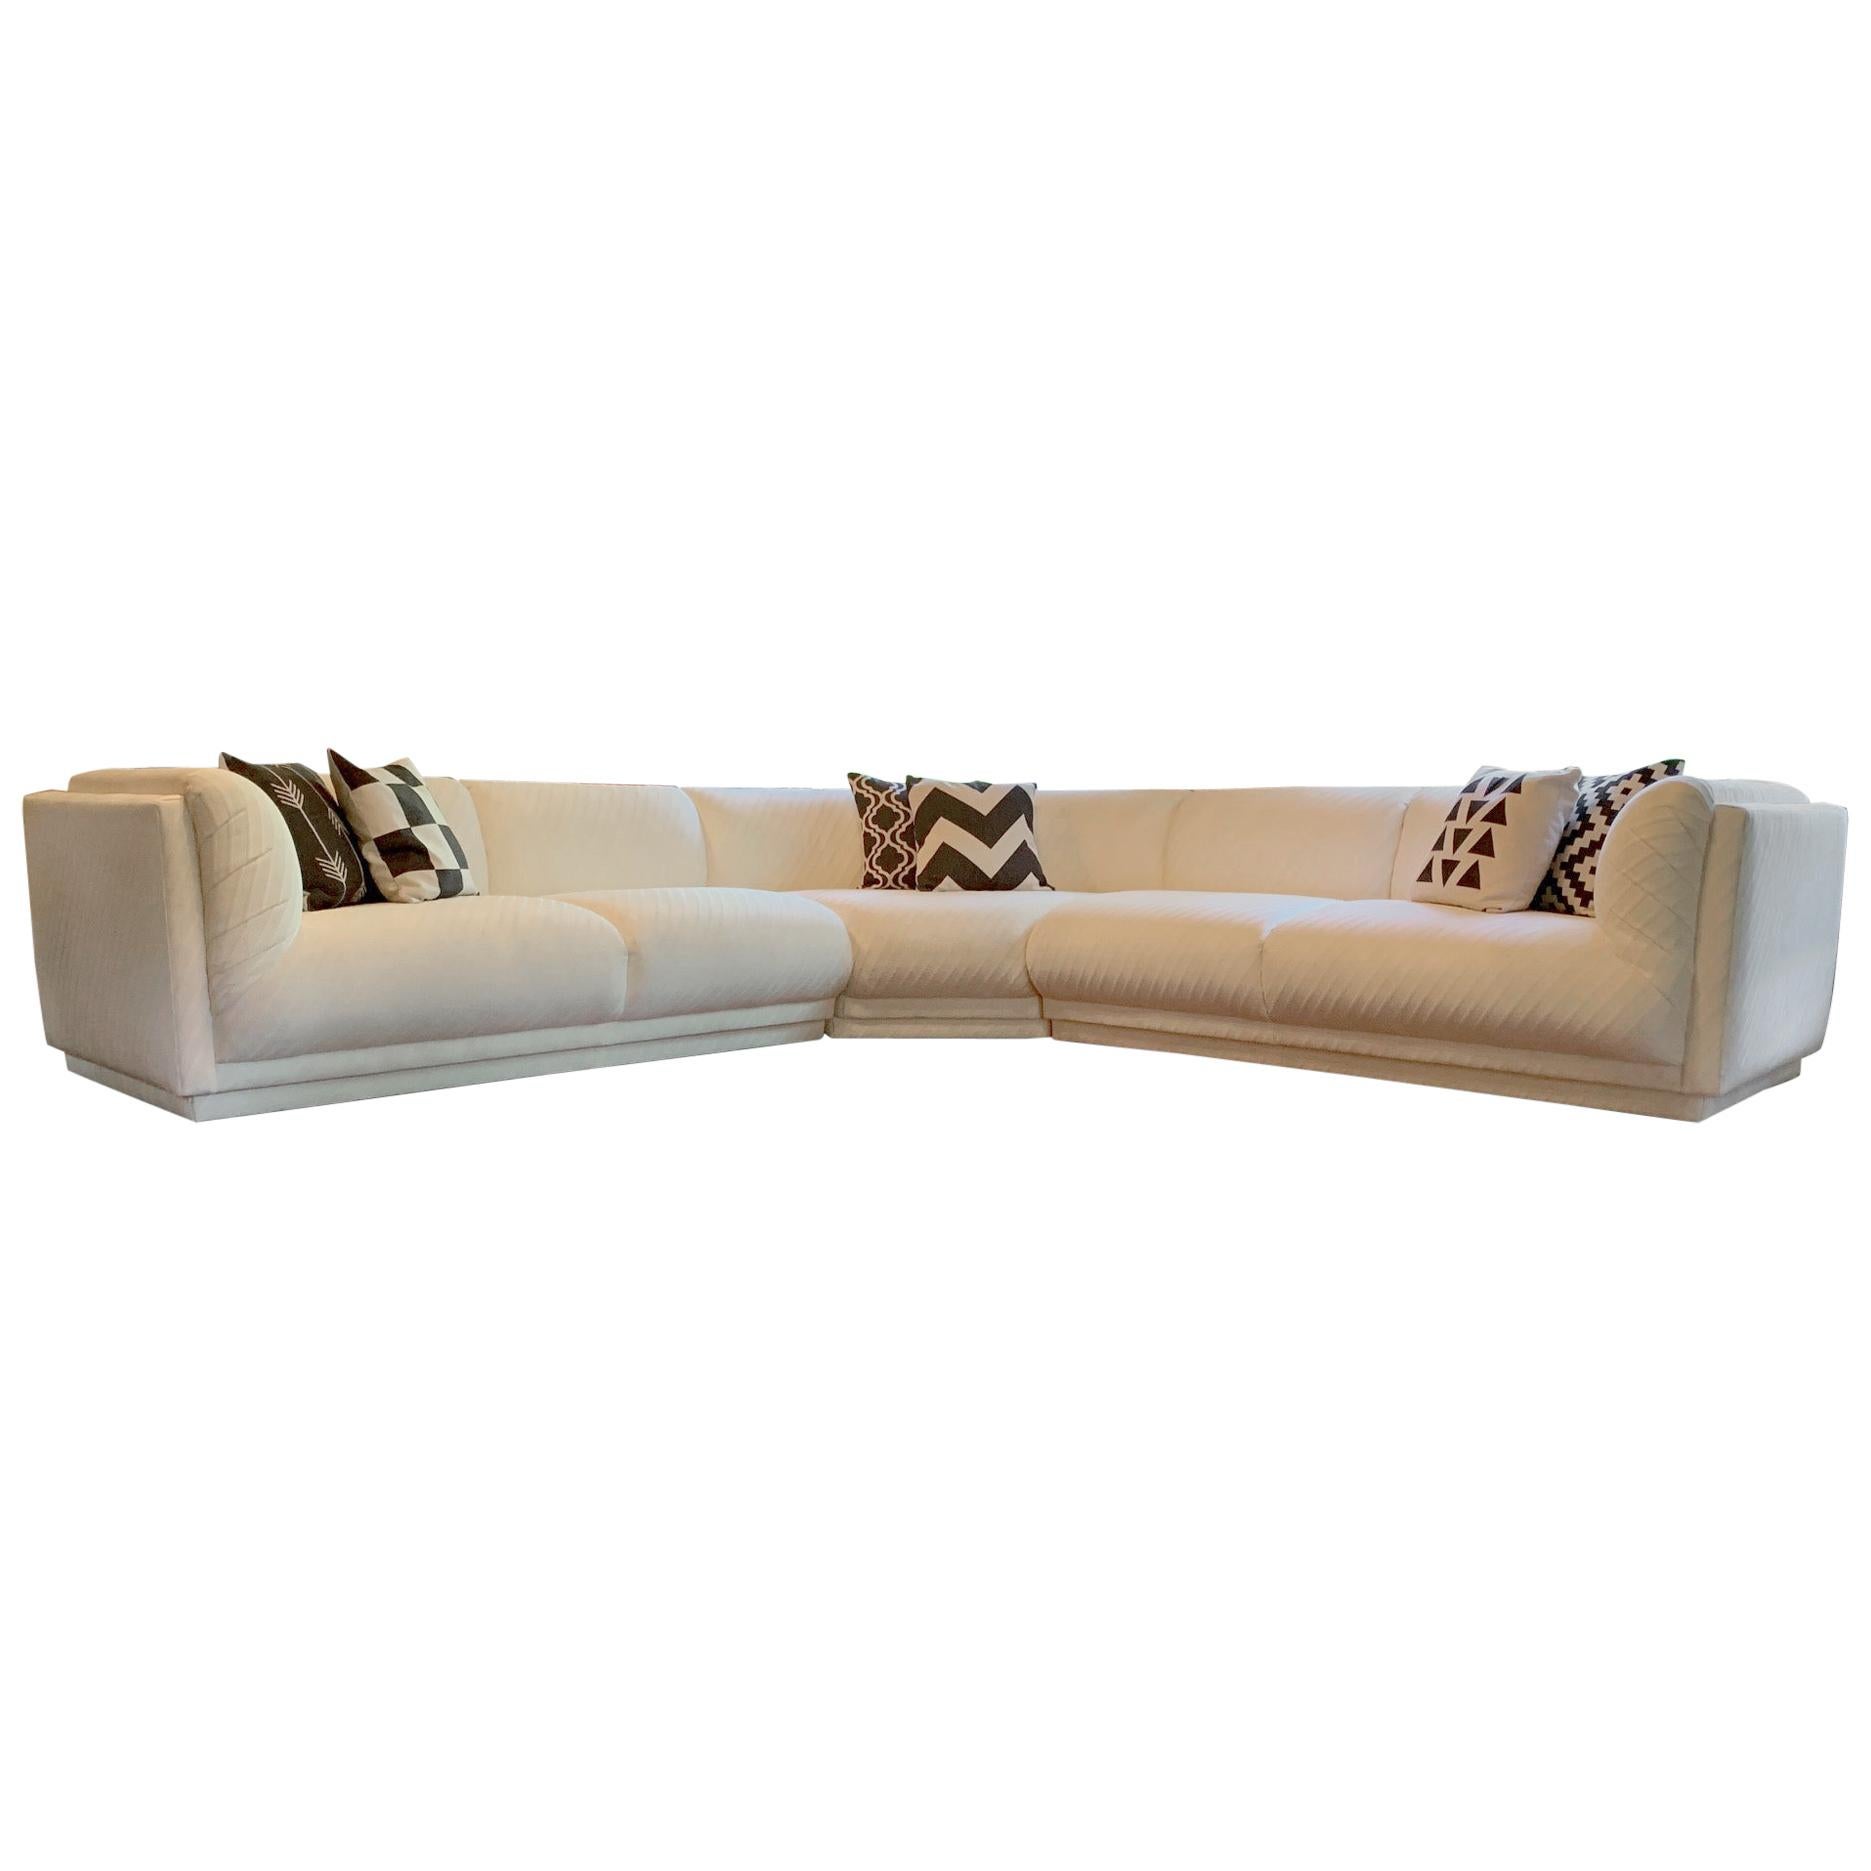 This 3 piece sectional is part of the 1980’s Bernhardtn Flair Collection and is often attributed to Milo Baughman. It has been flawlessly kept by it’s original owner having beautiful original upholstery and like-new cushioning throughout. Each piece